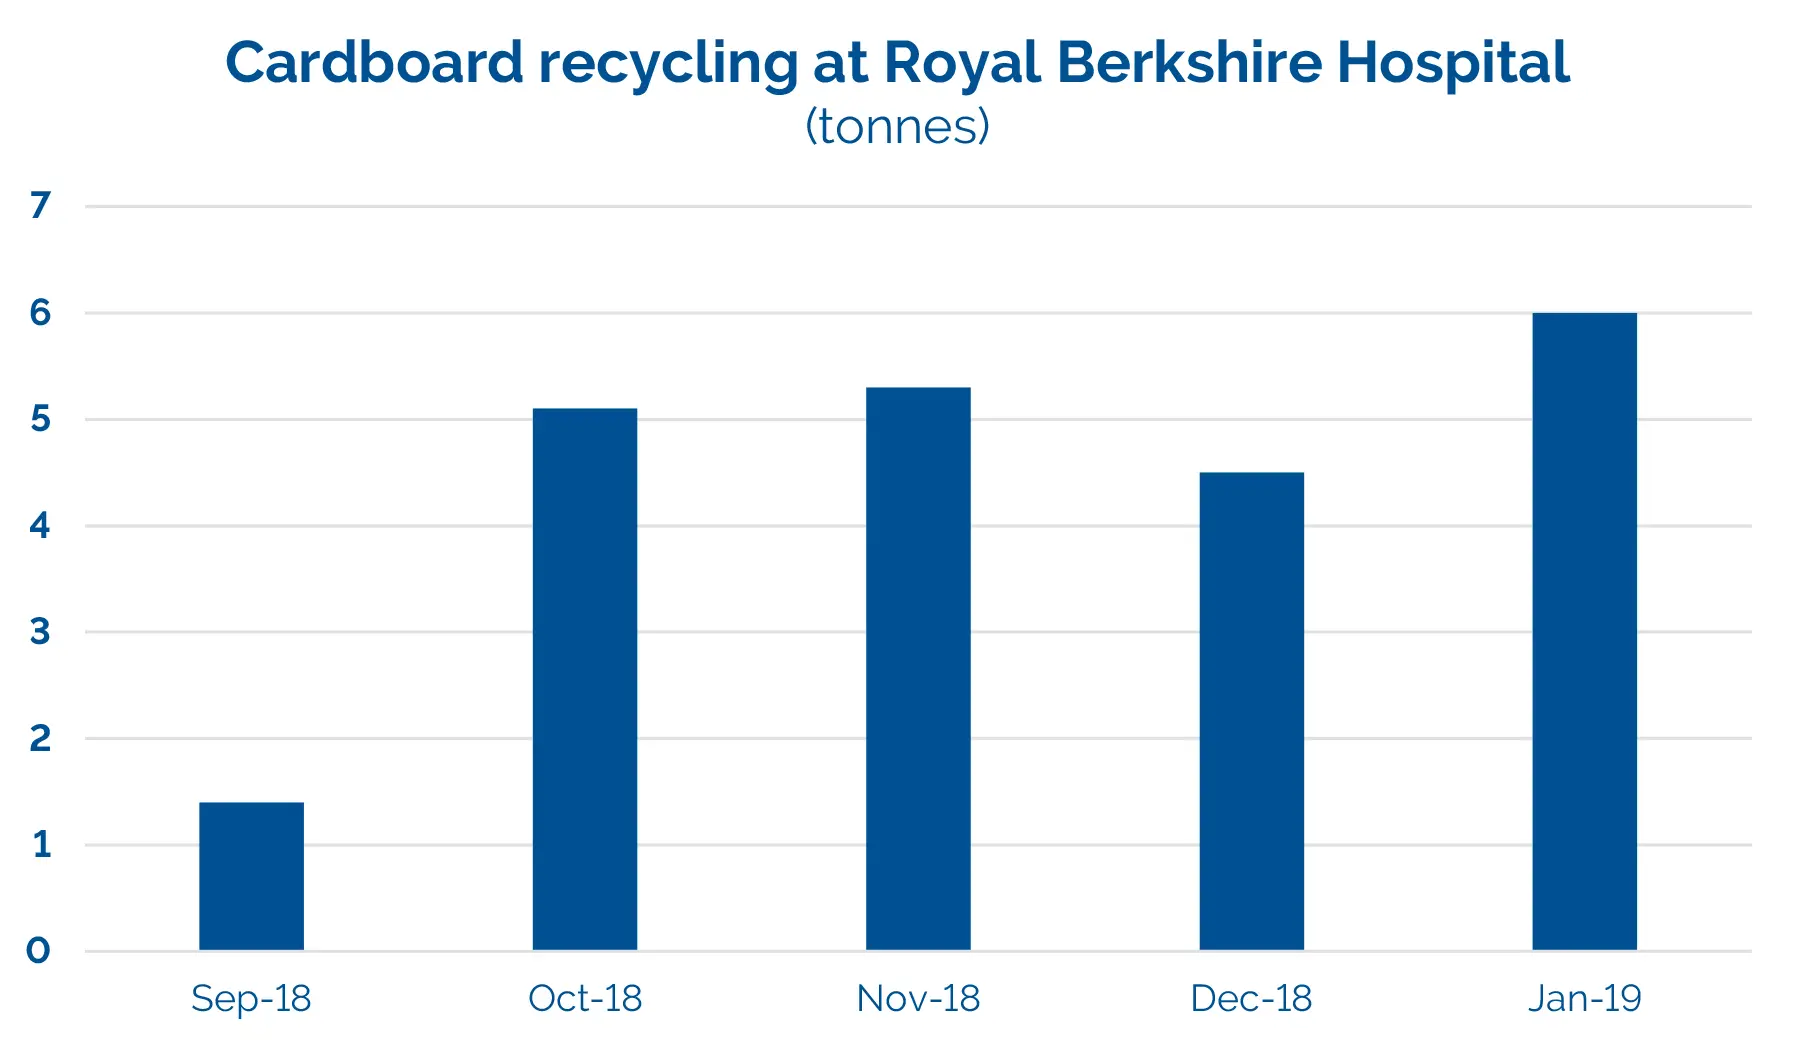 Cardboard recycling tonnages at the Royal Berkshire Hospital in Reading, which increased by 400% between September 2018 and January 2018